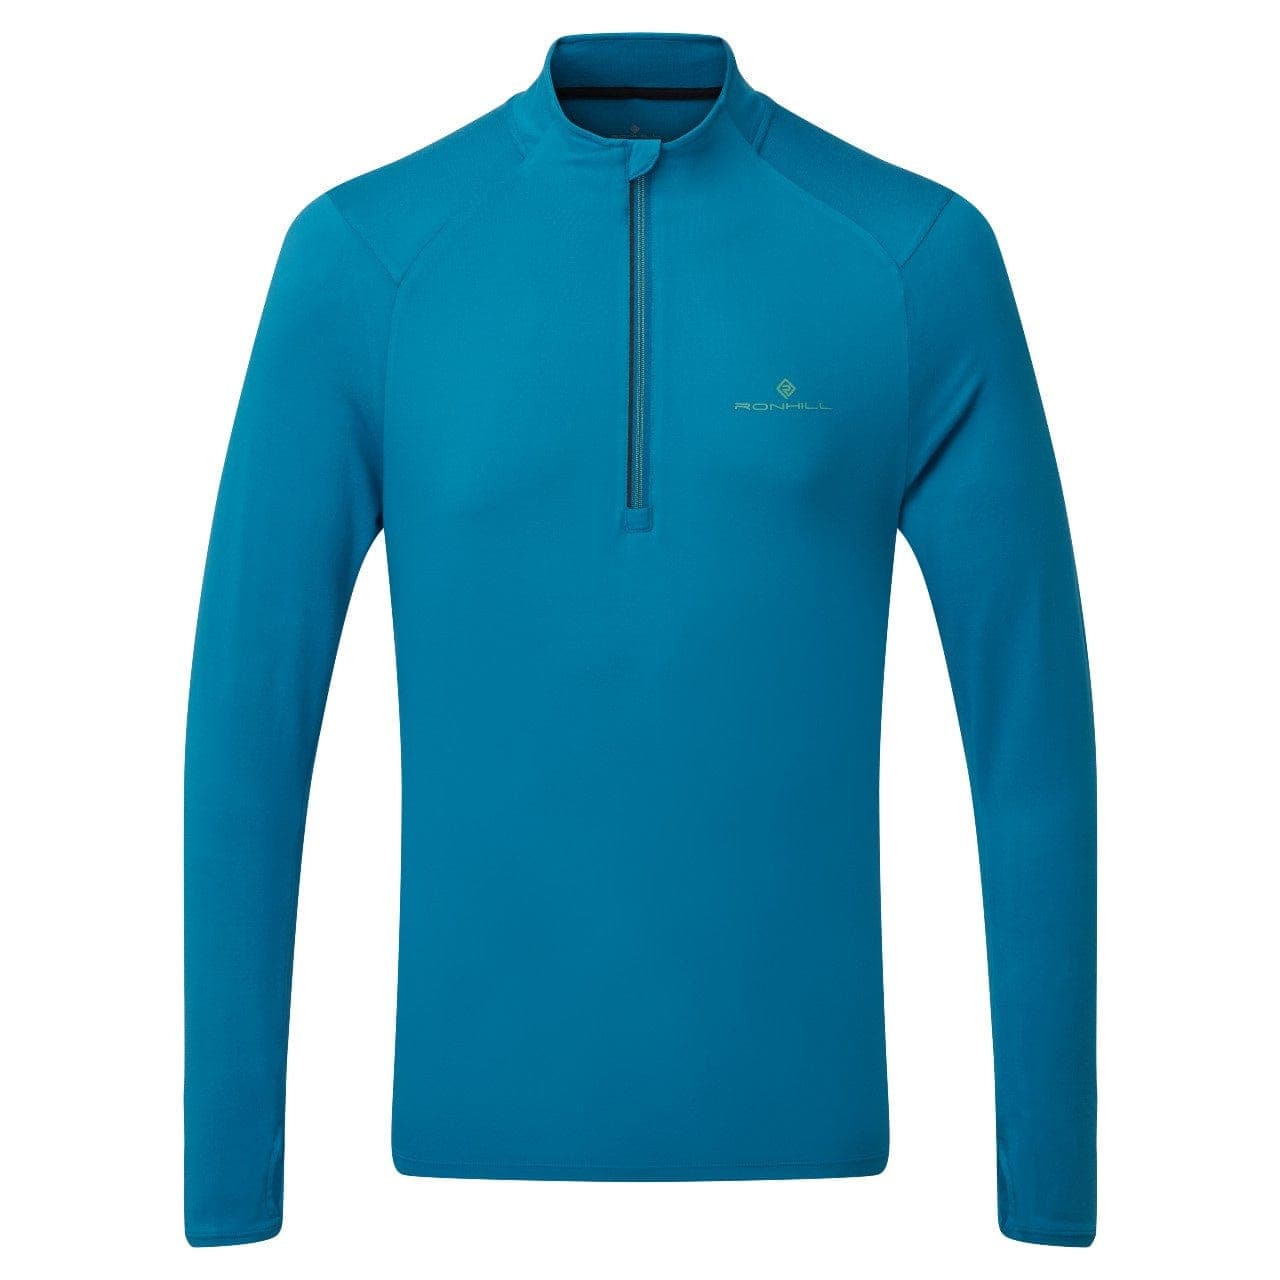 Ronhill Tech Thermal 1/2 Zip Tee  (Mens) - Prussian Blue/Willow